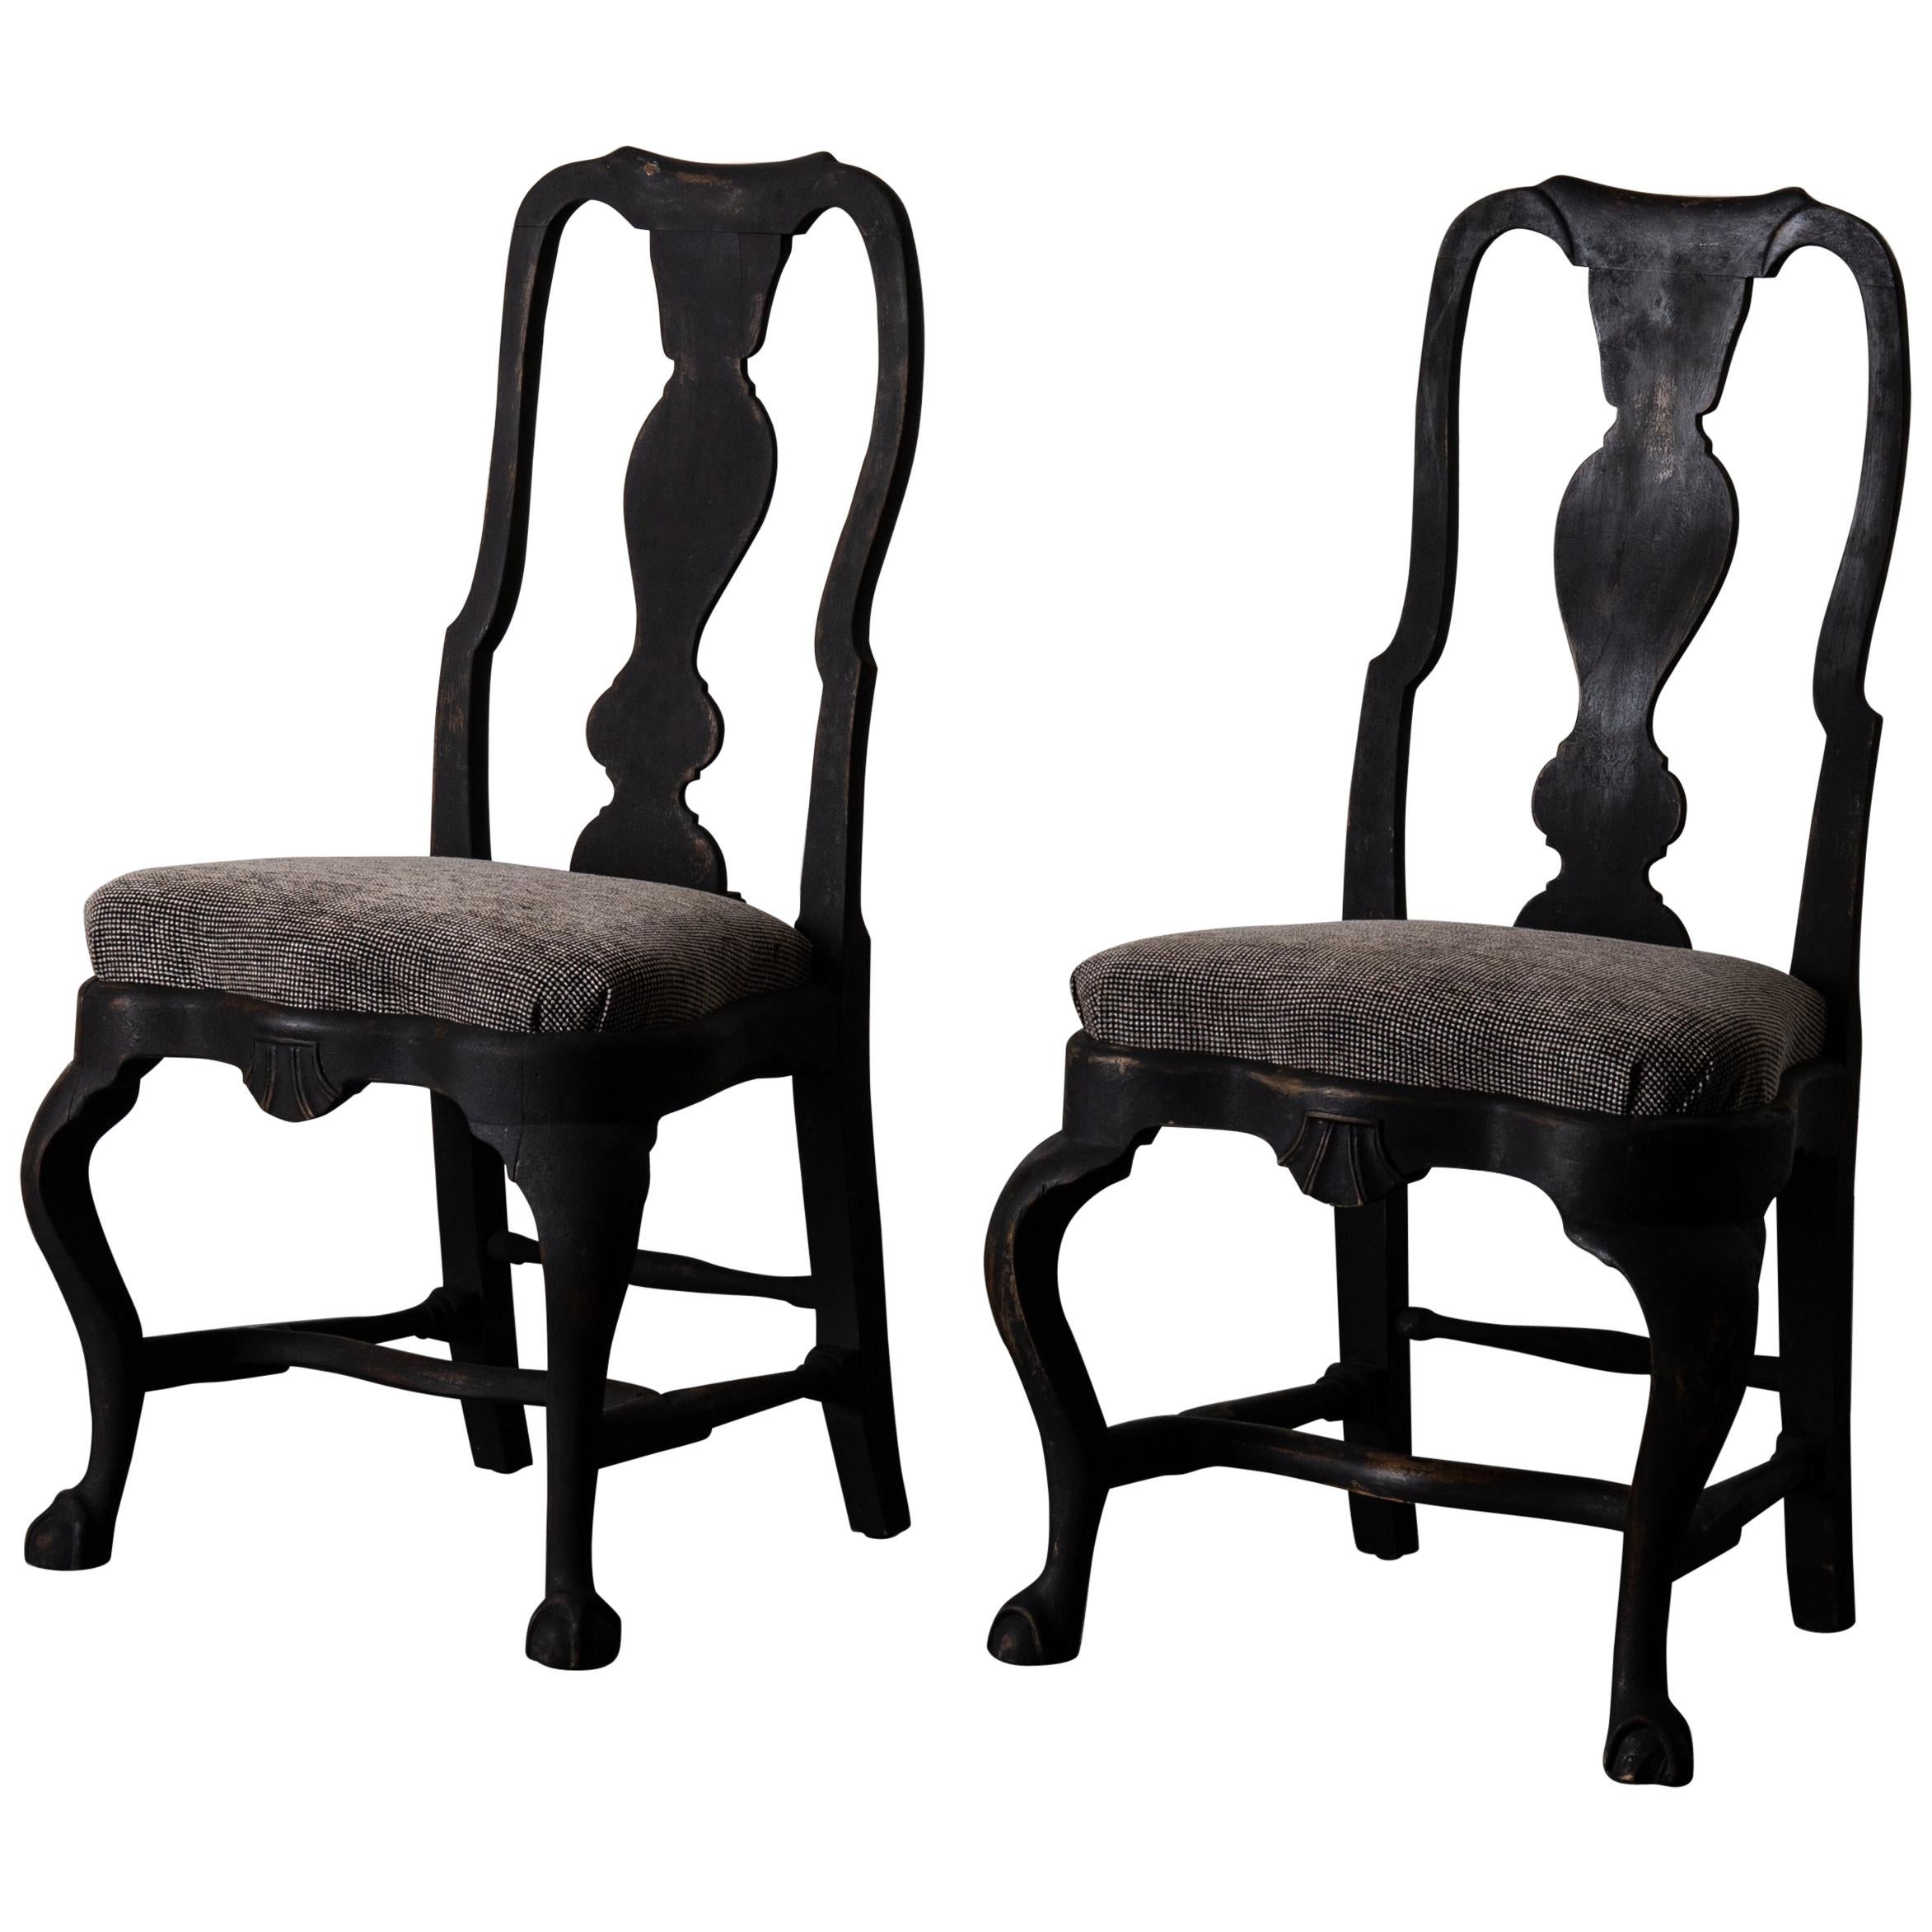 Pair of Chairs Swedish Black Rococo, 18th Century, Sweden